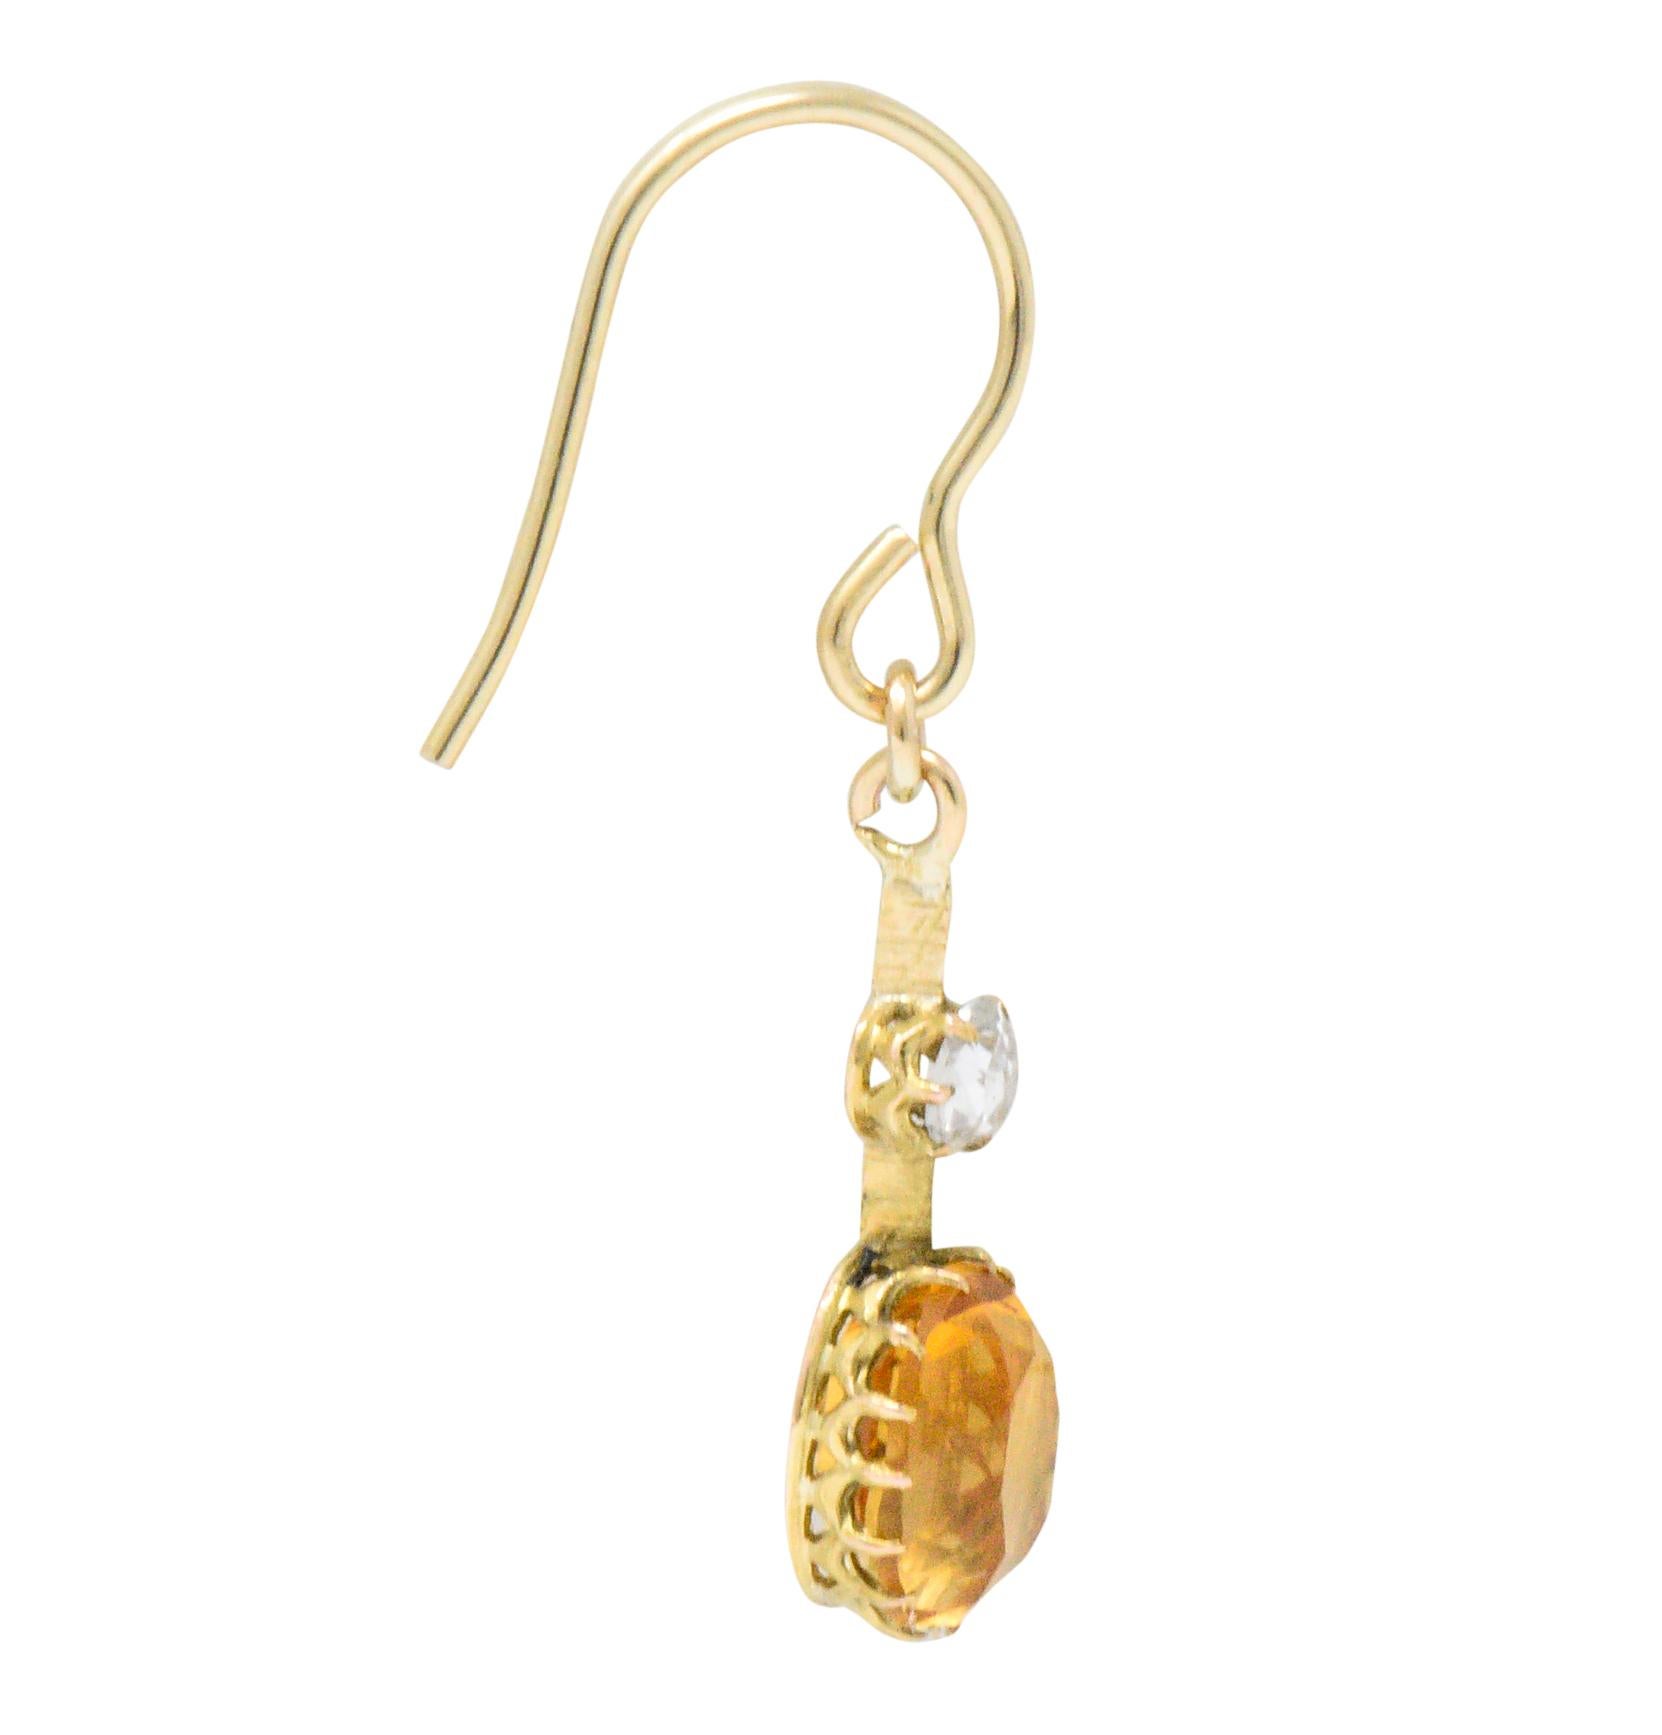 Each features an oval cut citrine weighing approximately 2.45 carats total, bright yellow orange

Claw set with rose cut diamond accents

With 14 karat gold French hooks that were added later

Length: 1 1/4  Inches

Total Weight: 1.7 Grams

Refined.